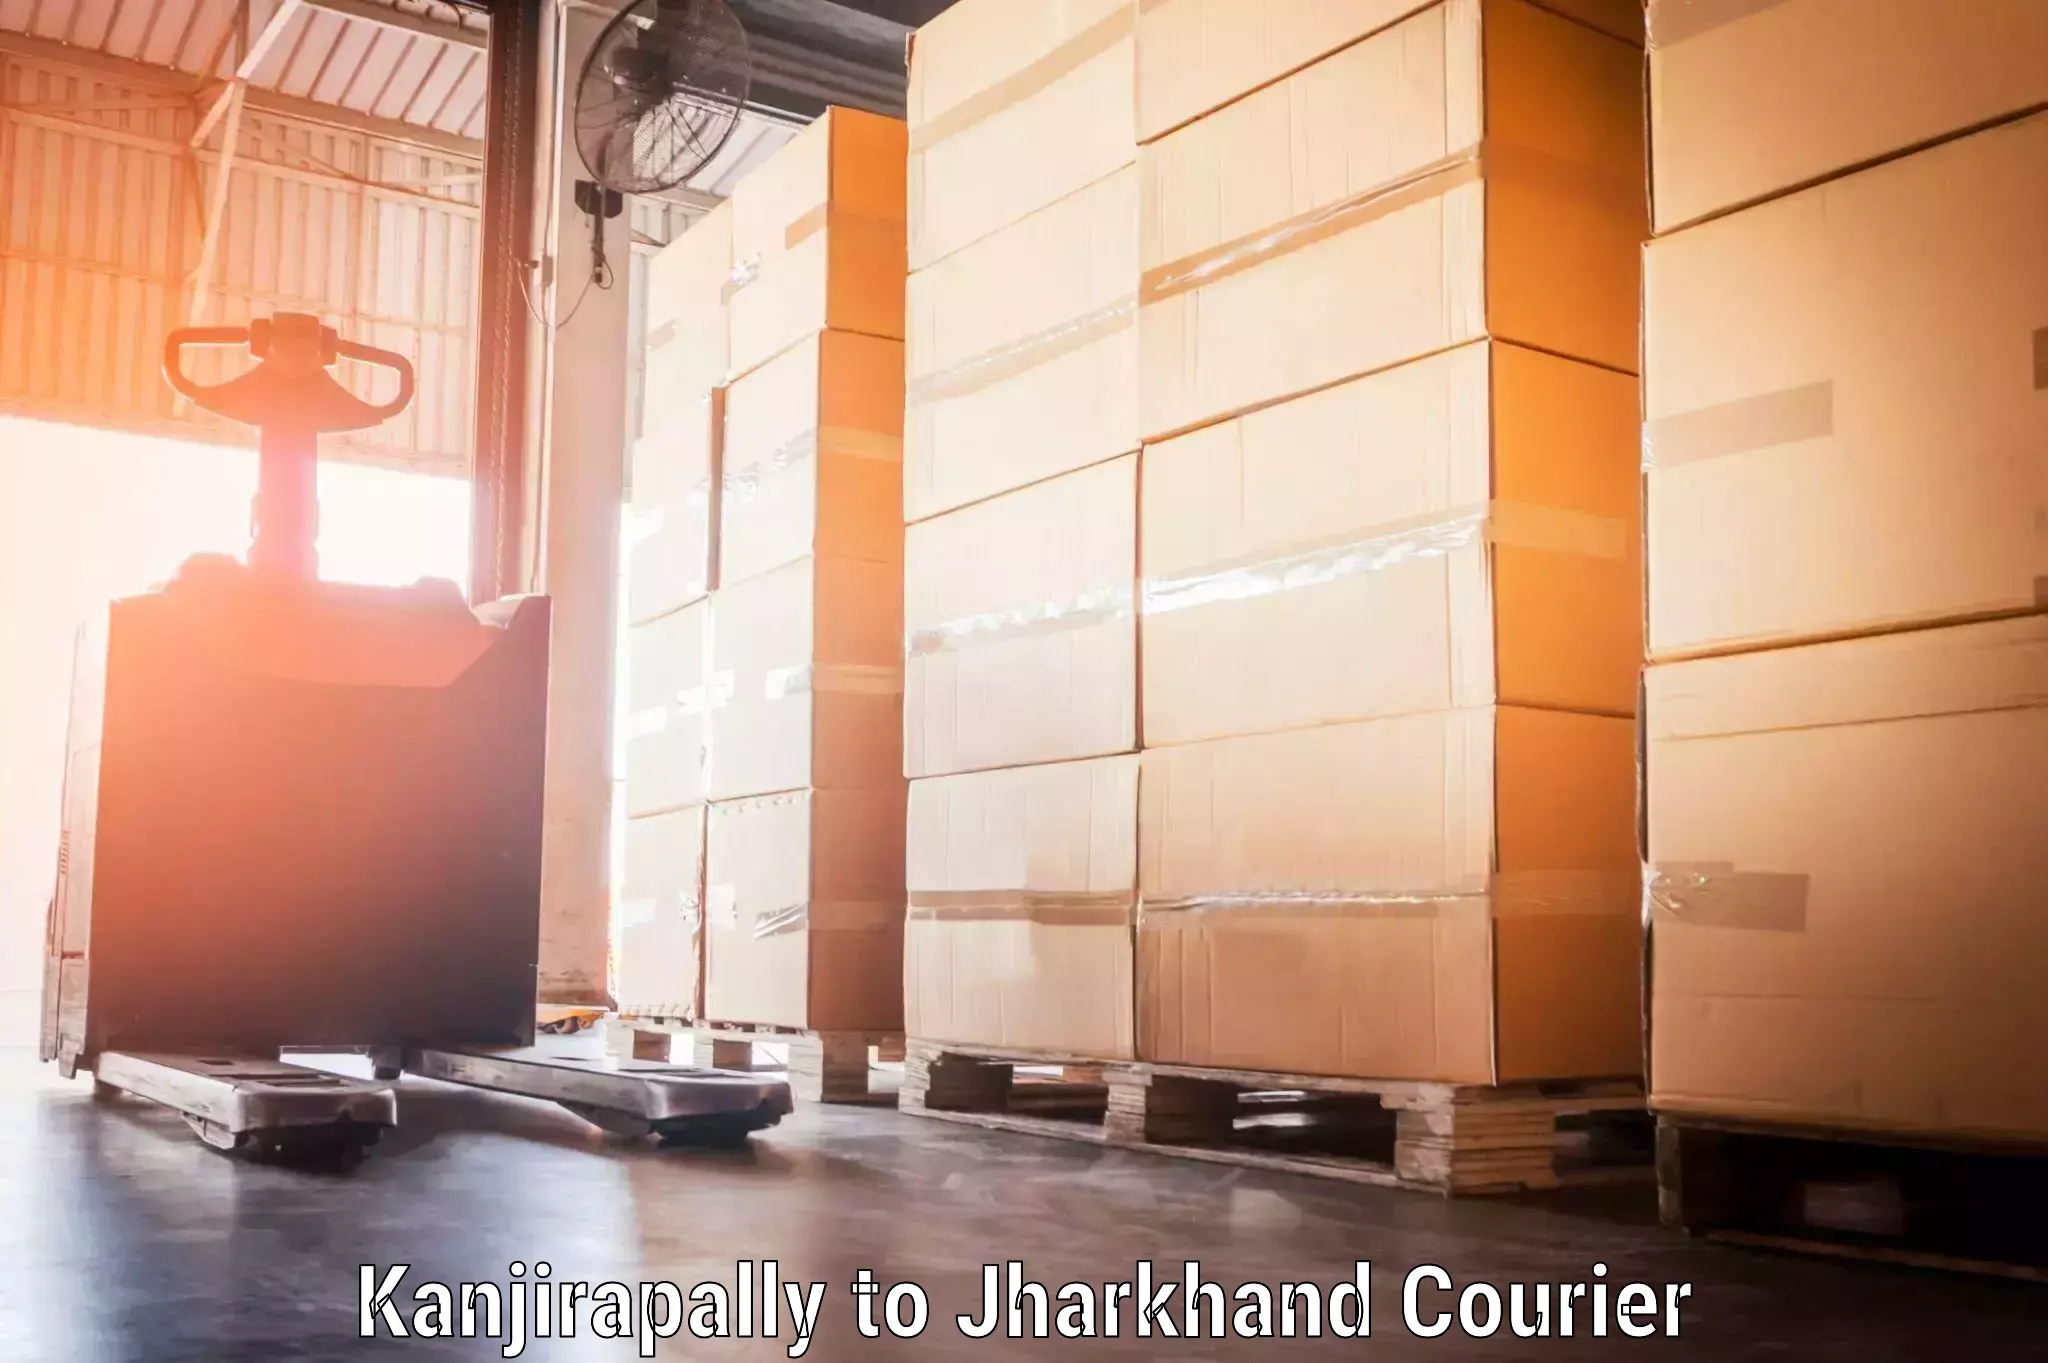 Baggage delivery optimization Kanjirapally to Dhanbad